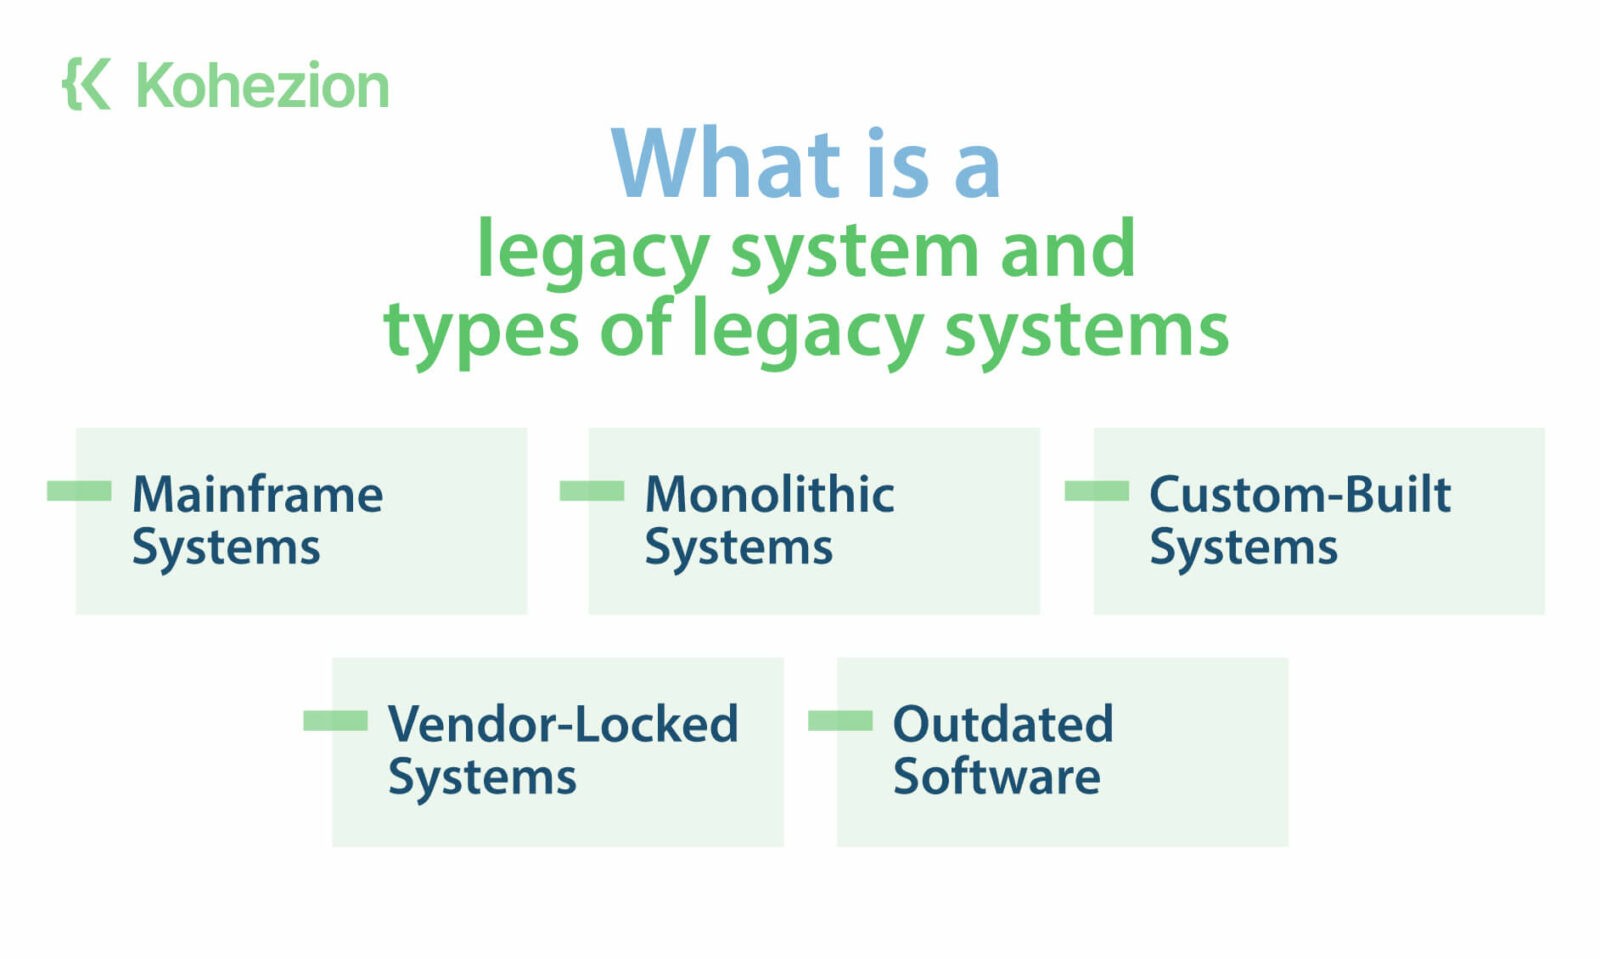 Page-1.25.-What-is-a-legacy-system-and-types-of-legacy-systems (1)